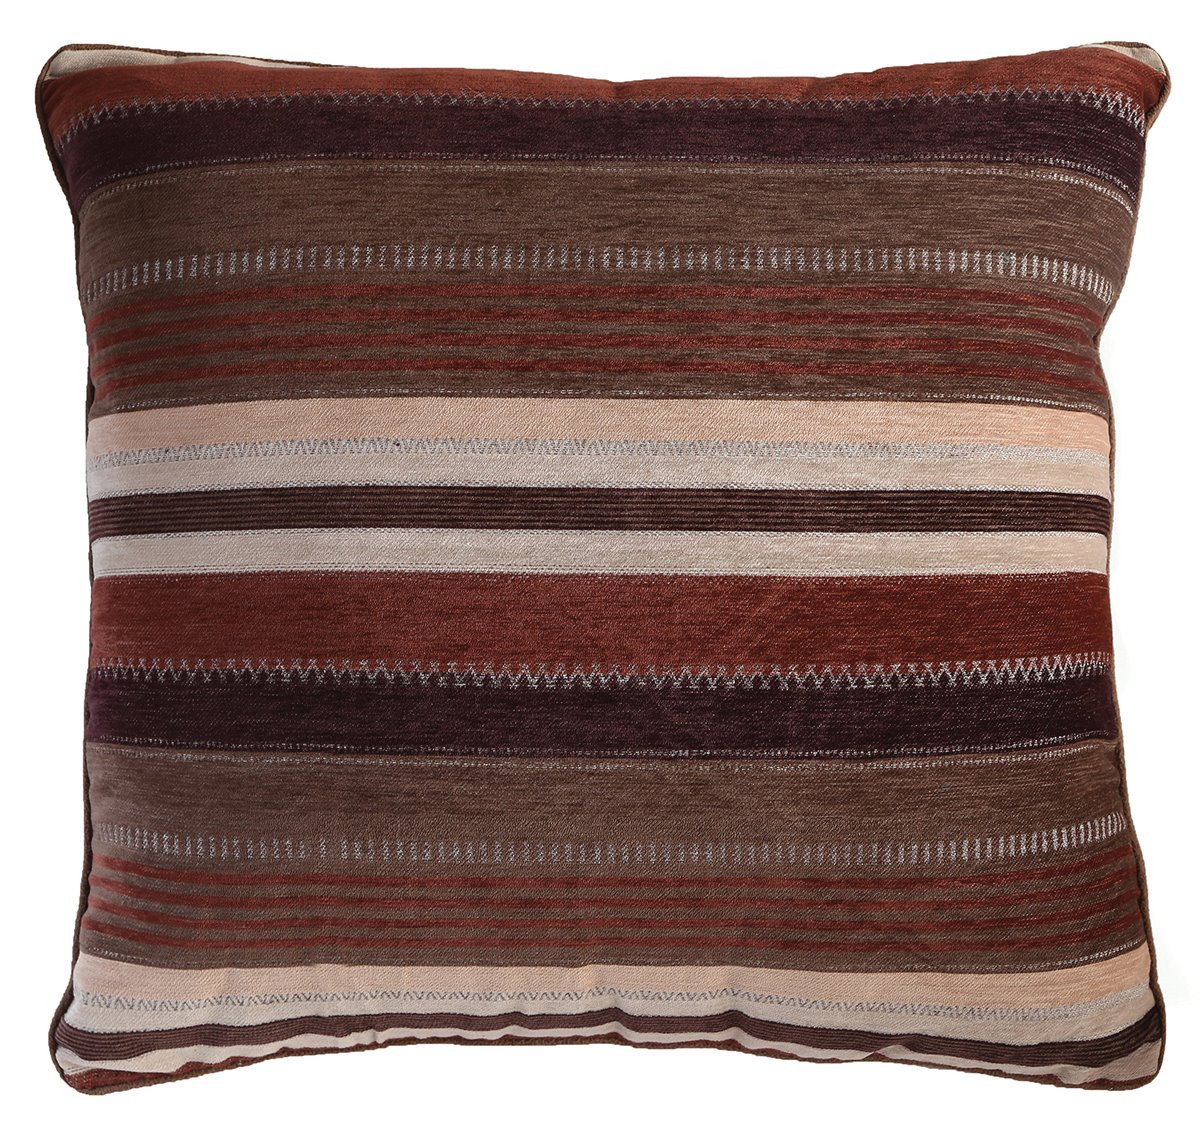 Carstens Old West Stripe Southwestern Euro Pillow Cover 27" x 27"